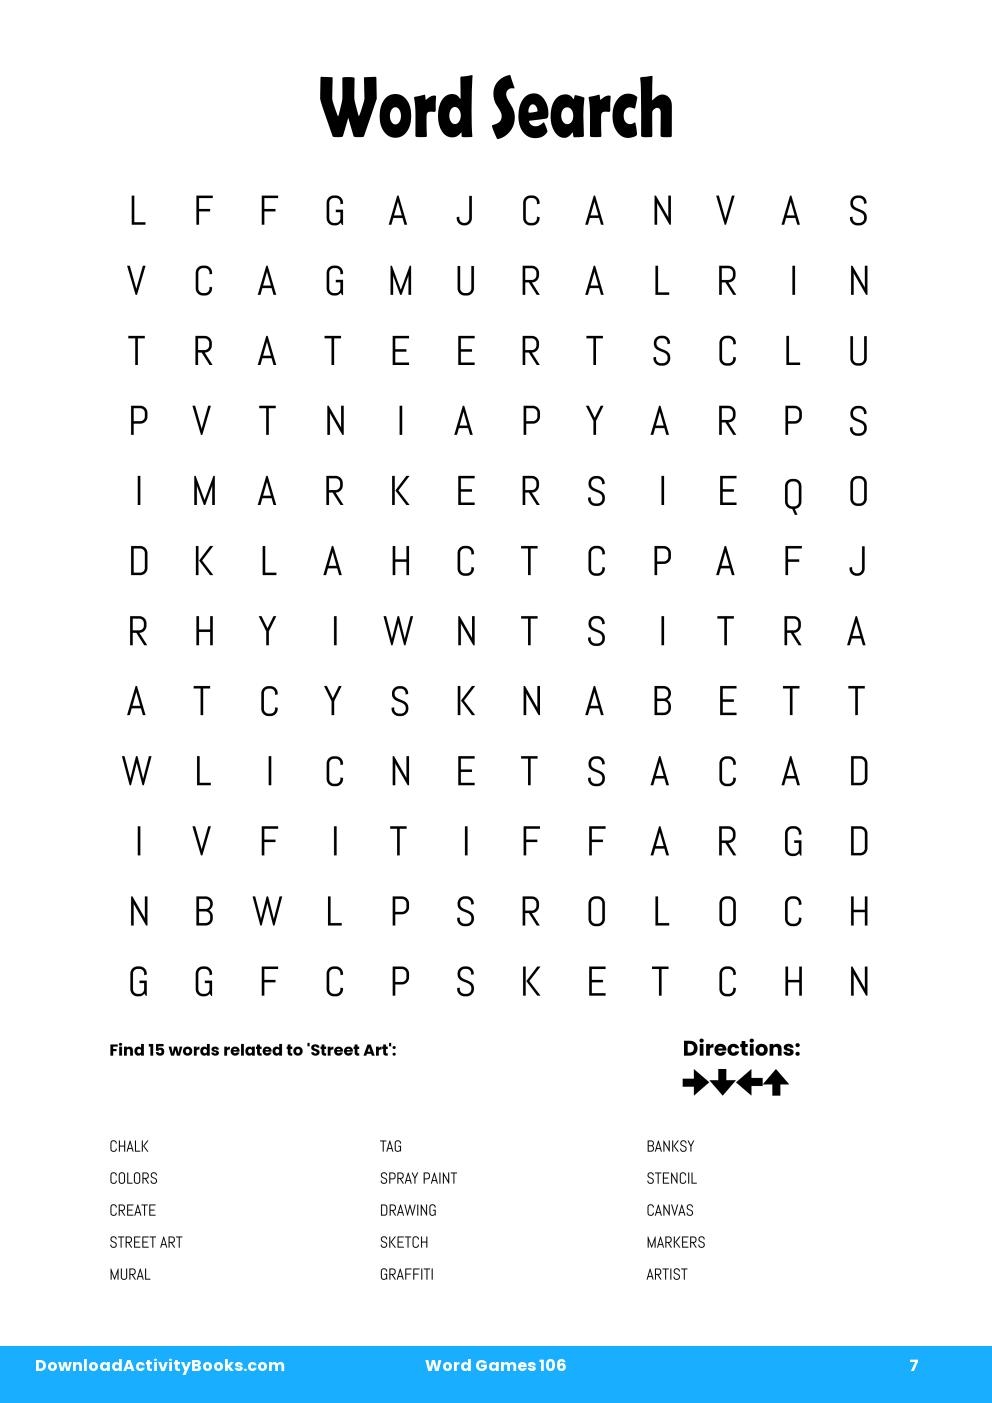 Word Search in Word Games 106